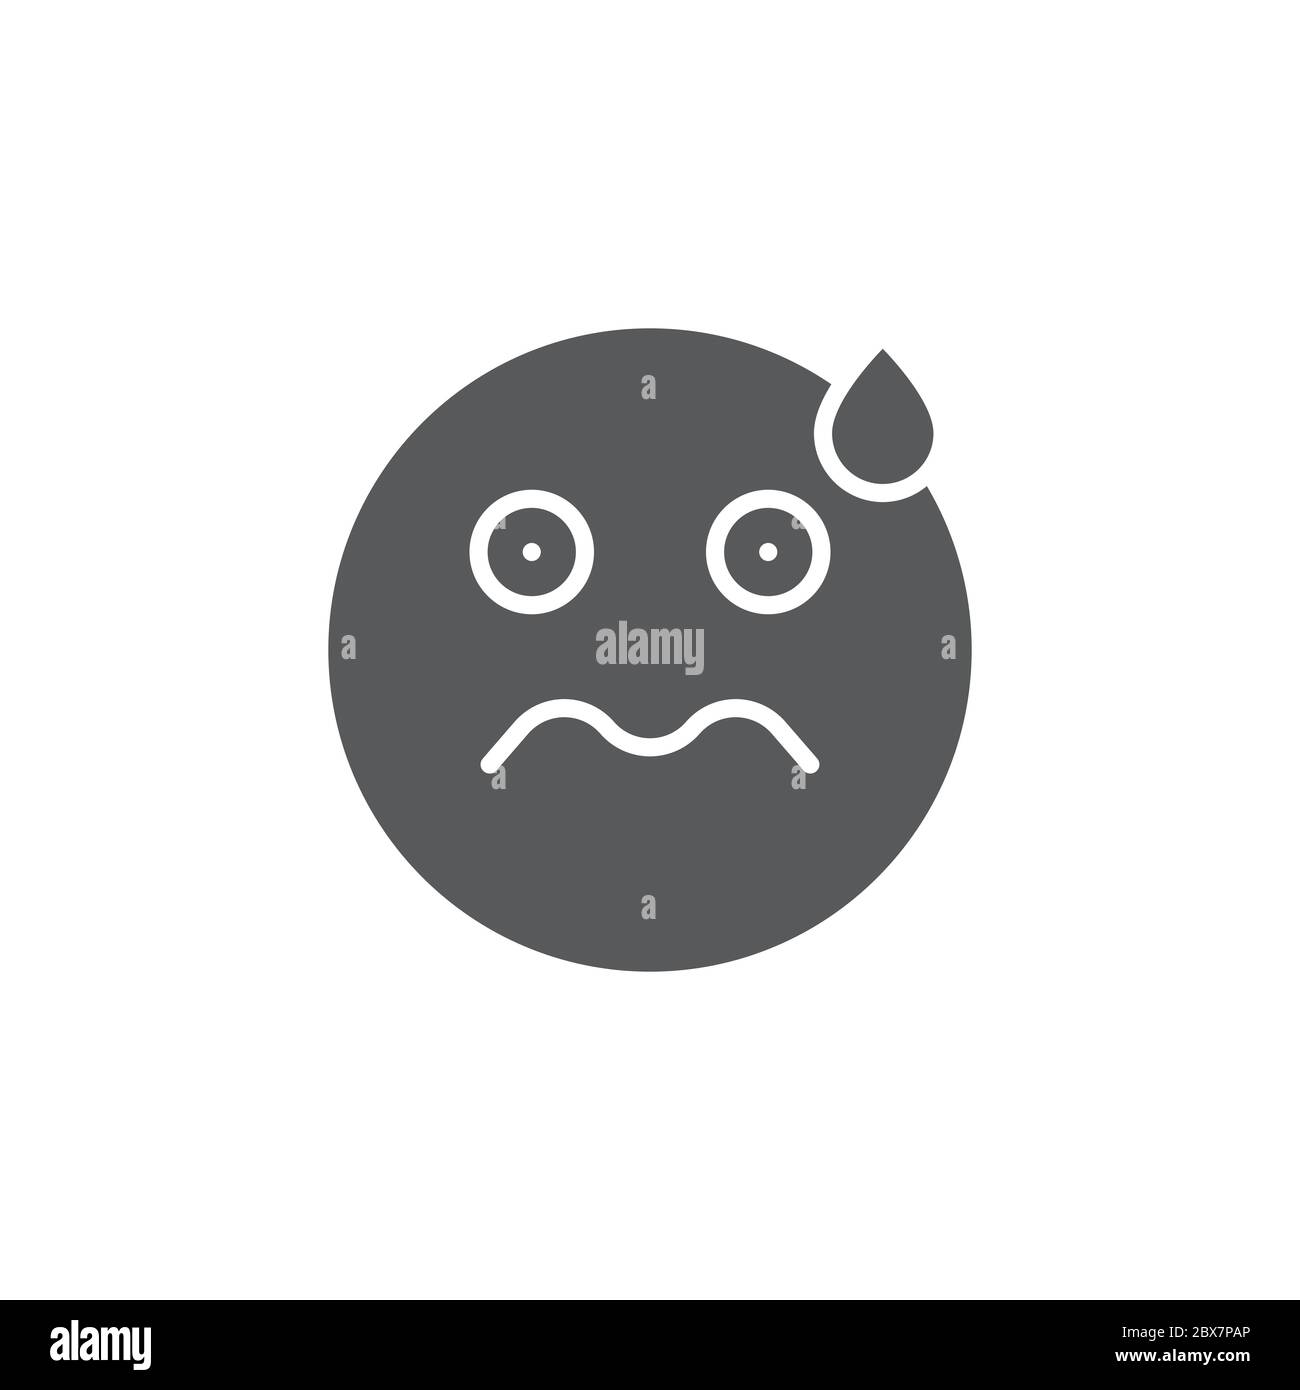 Worried Face emoticon vector icon symbol isolated on white background Stock Vector